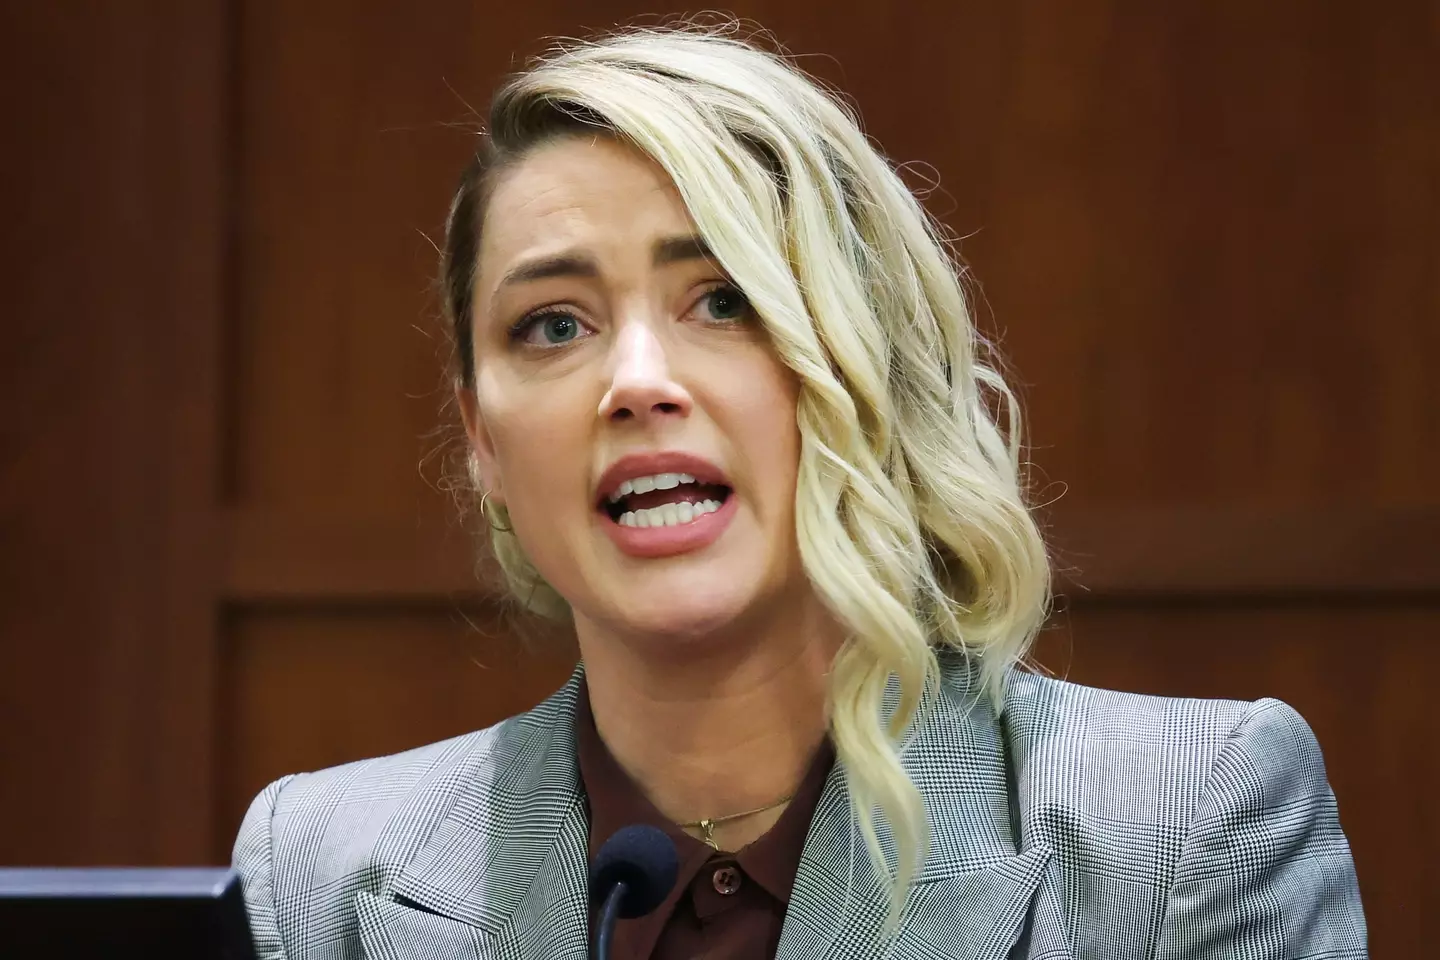 Amber Heard was awarded $2 million in damages.